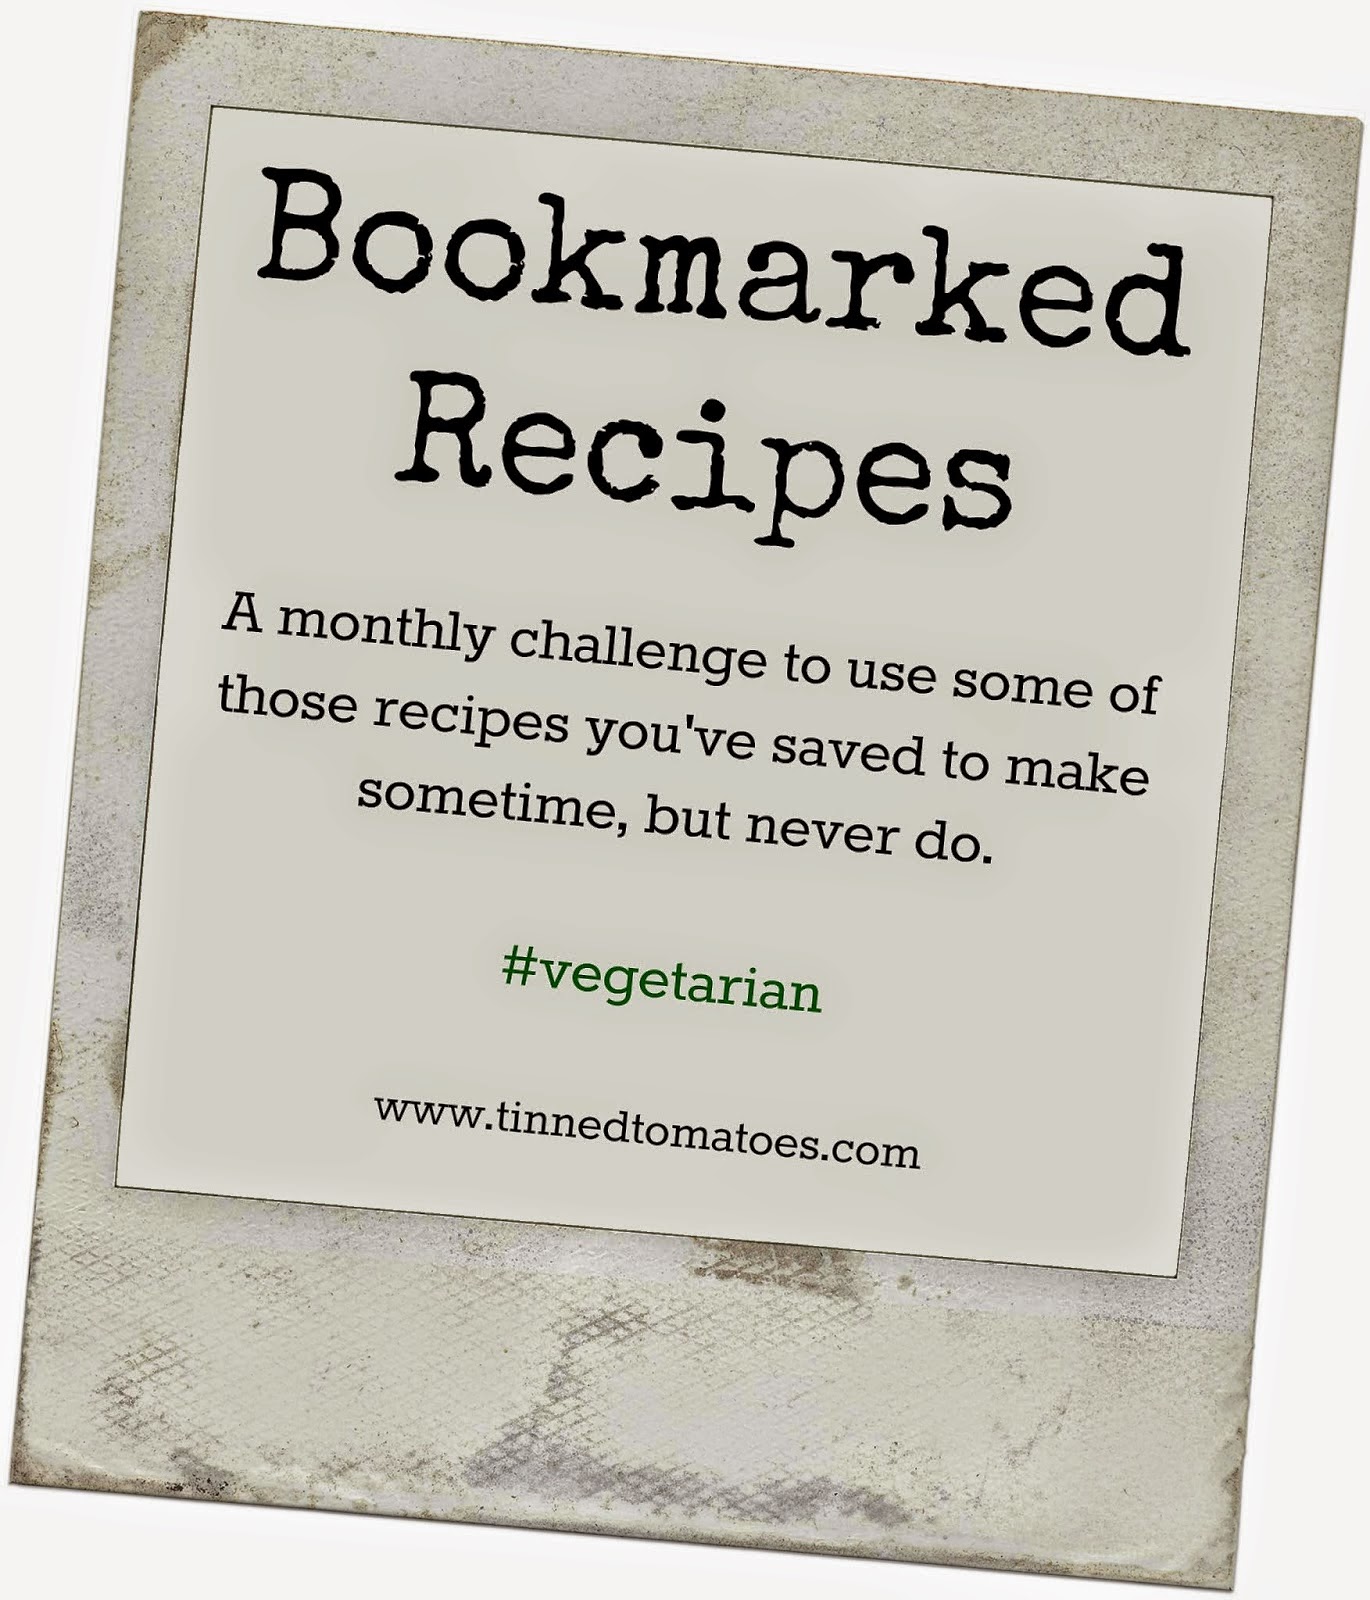 Using those Bookmarked Recipes - Tinned Tomatoes